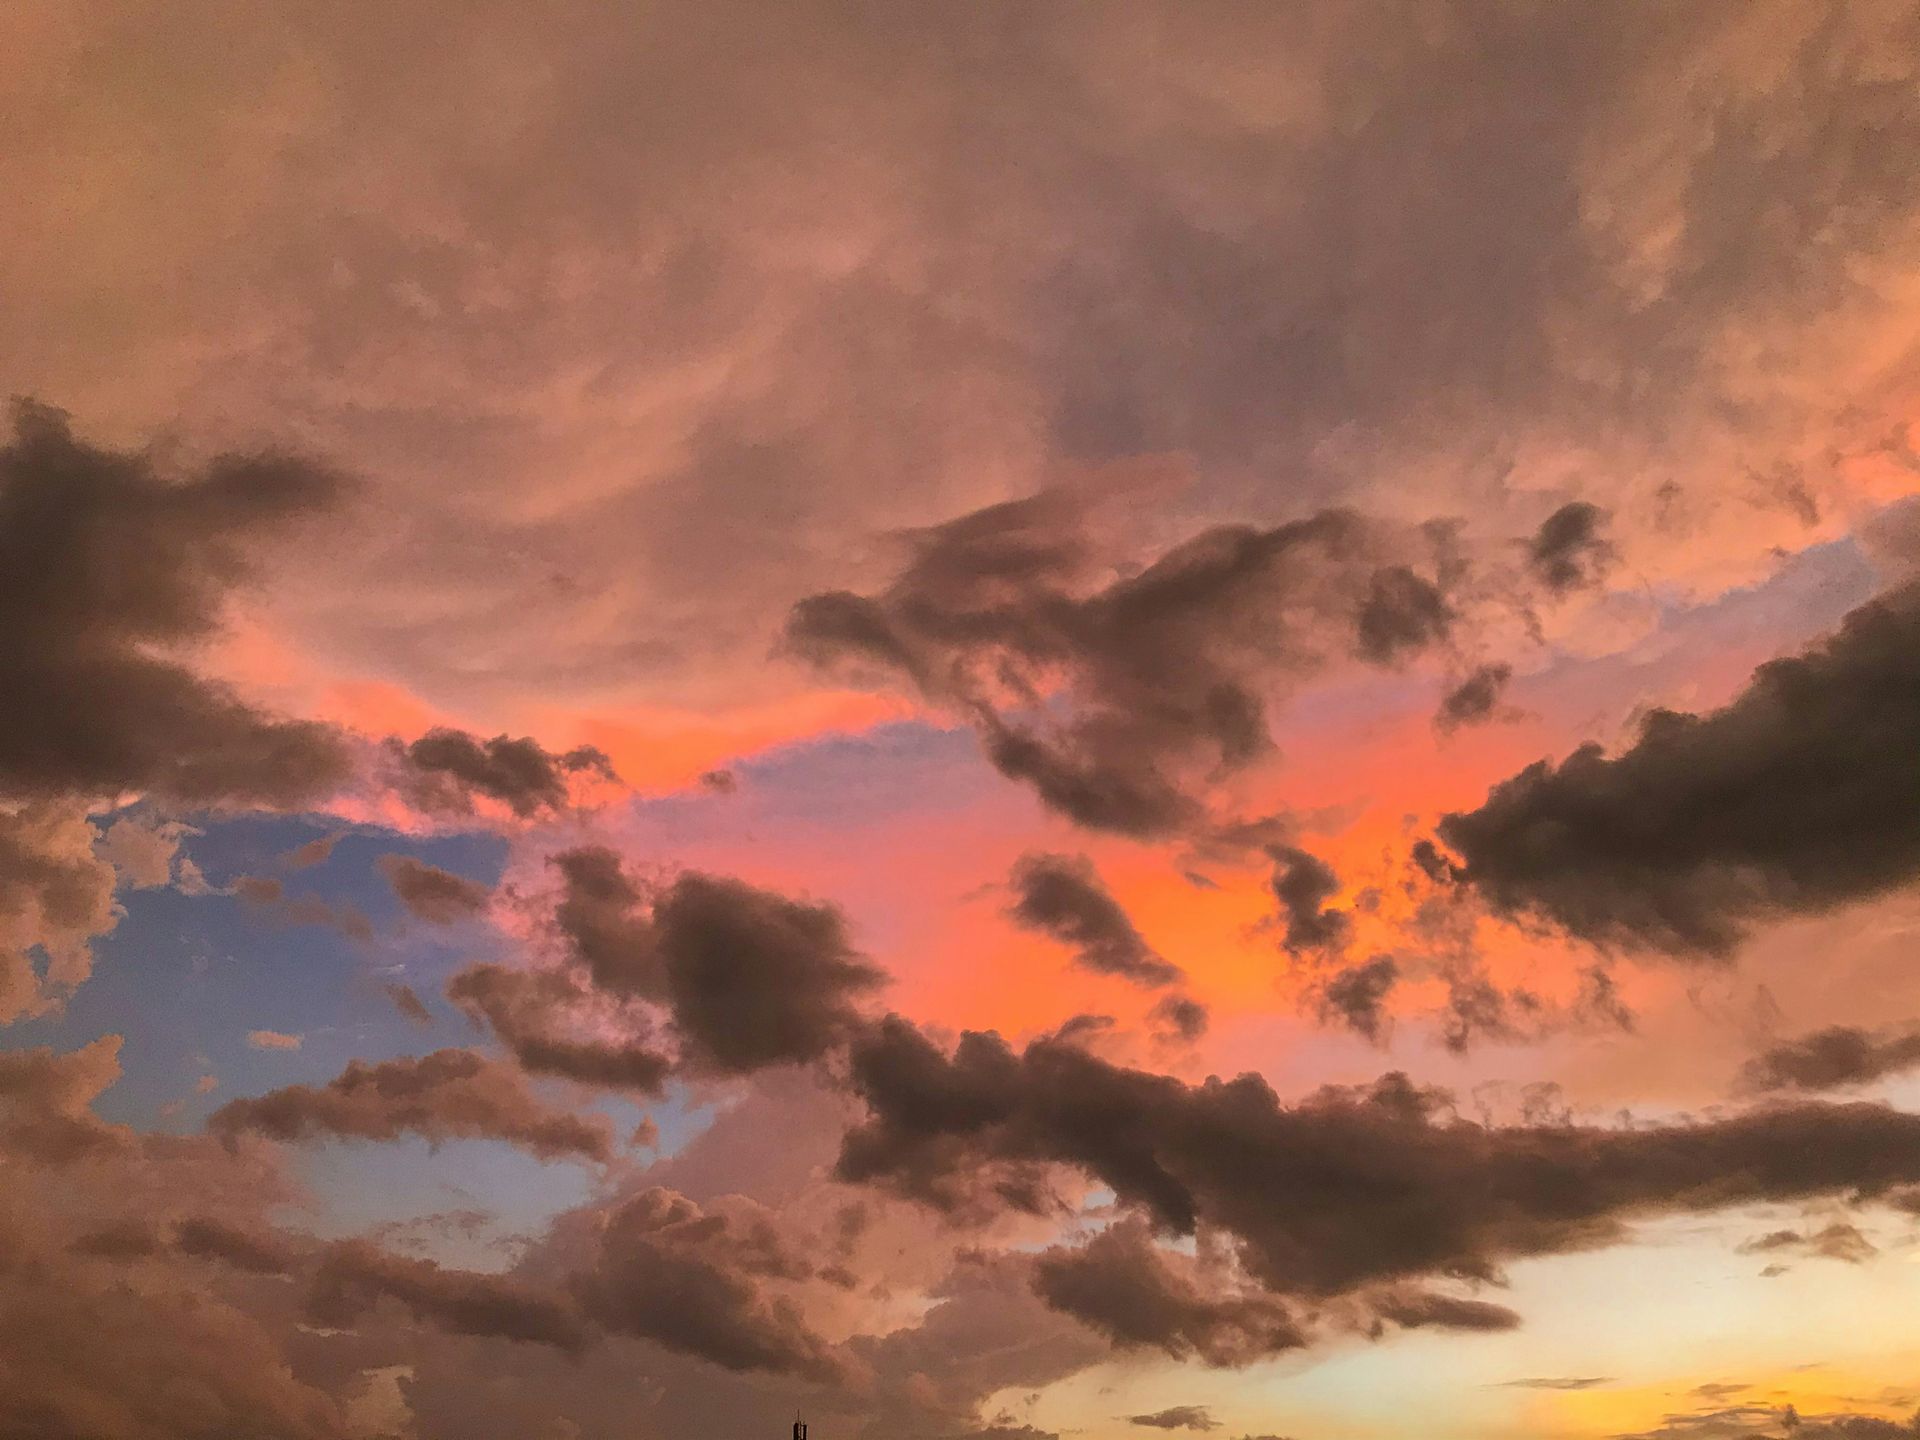 Vivid sunset sky with silhouetted clouds painted in striking shades of orange and pink.